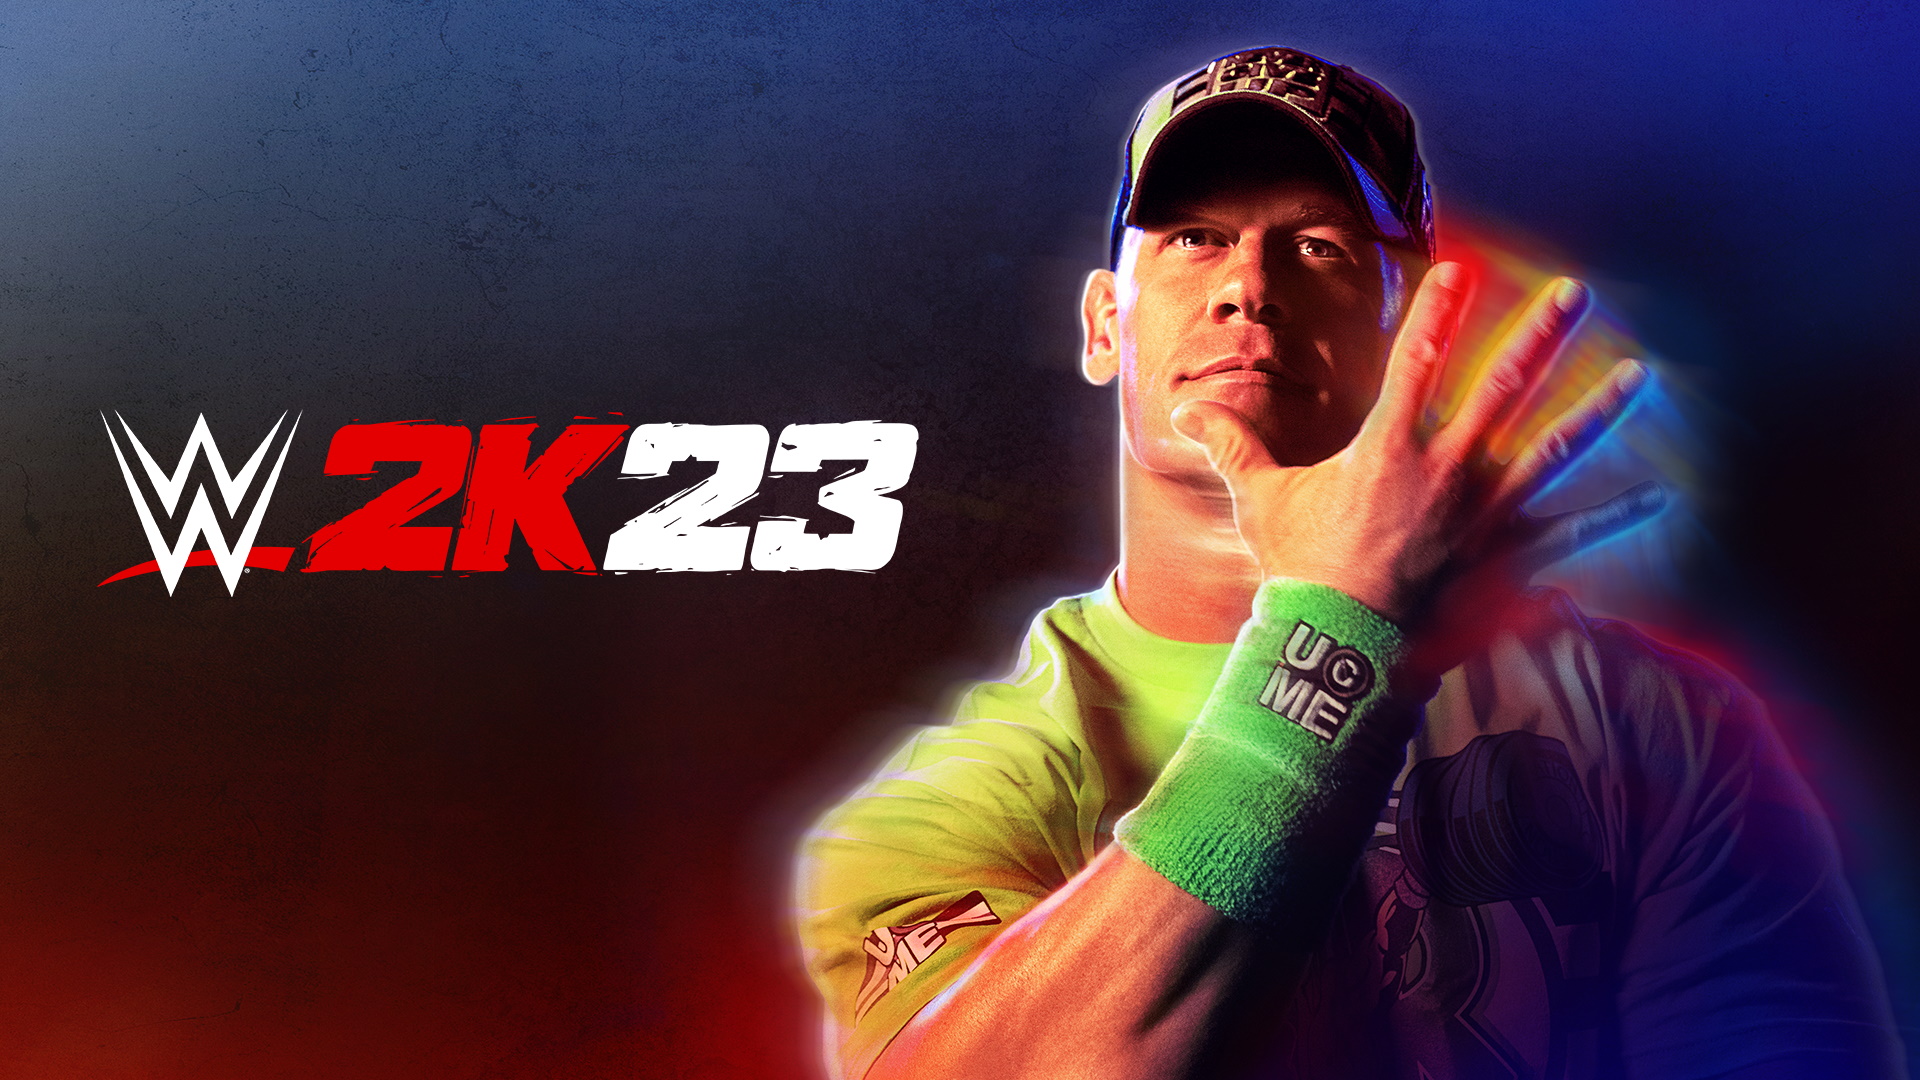 WWE 2K23 Cheat Codes: All Cheat Codes Revealed